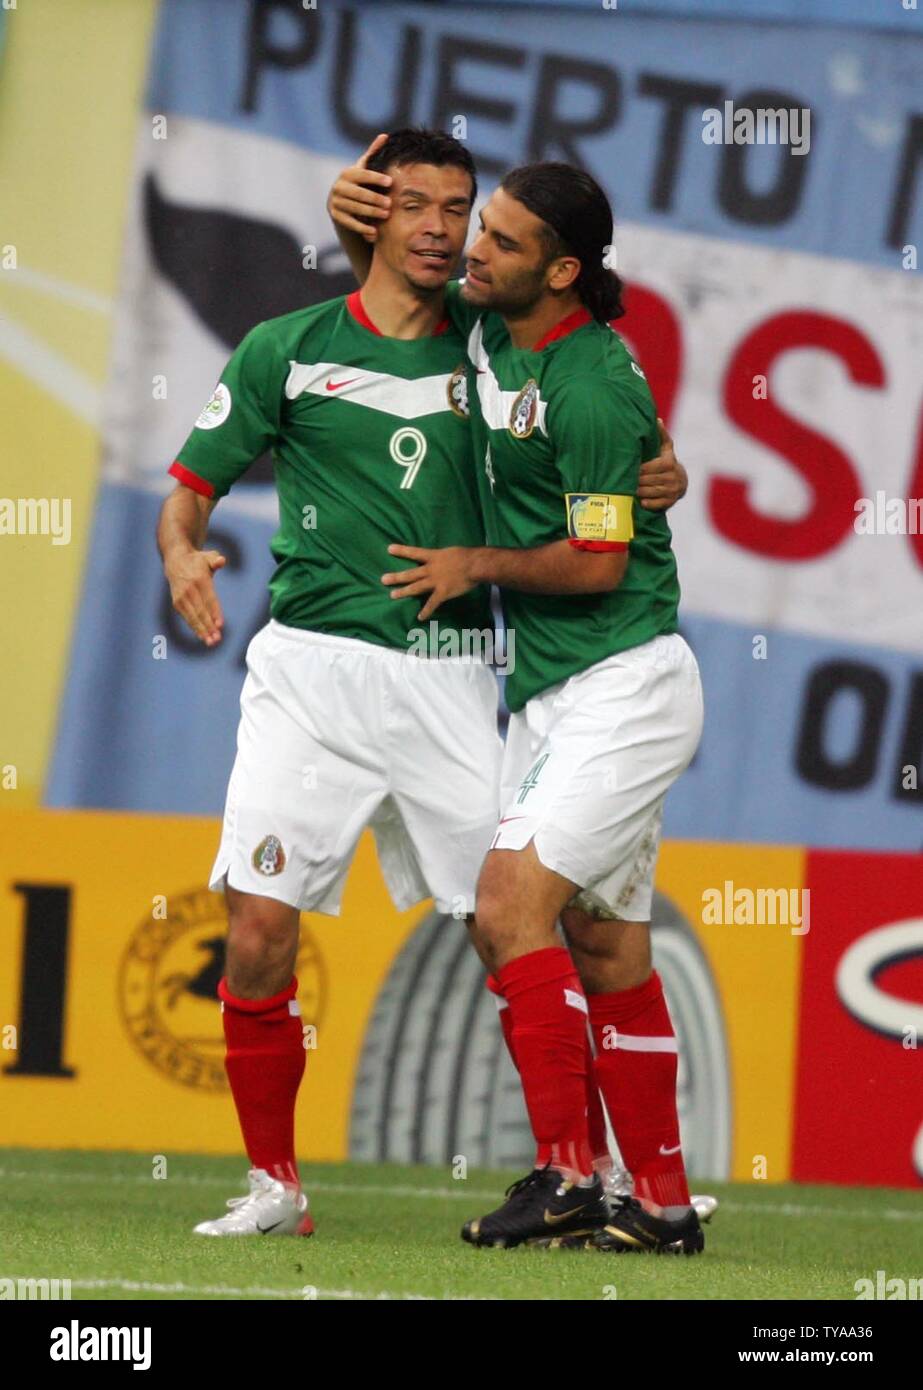 Mexico's Jared Borgetti congratulates teammate Rafael Marquez after he scored the first goal during the 16 knock-out stage of the FIFA World Cup Germany 2006 at the Zentralstadion in Leipzig, Germany, on June 24, 2006. Argentina needed extra-time and a wonder strike from Maxi Rodriguez to give them a 2-1 victory over Mexico and a place in the quarter-finals.   (UPI Photo/Christian Brunskill) Stock Photo